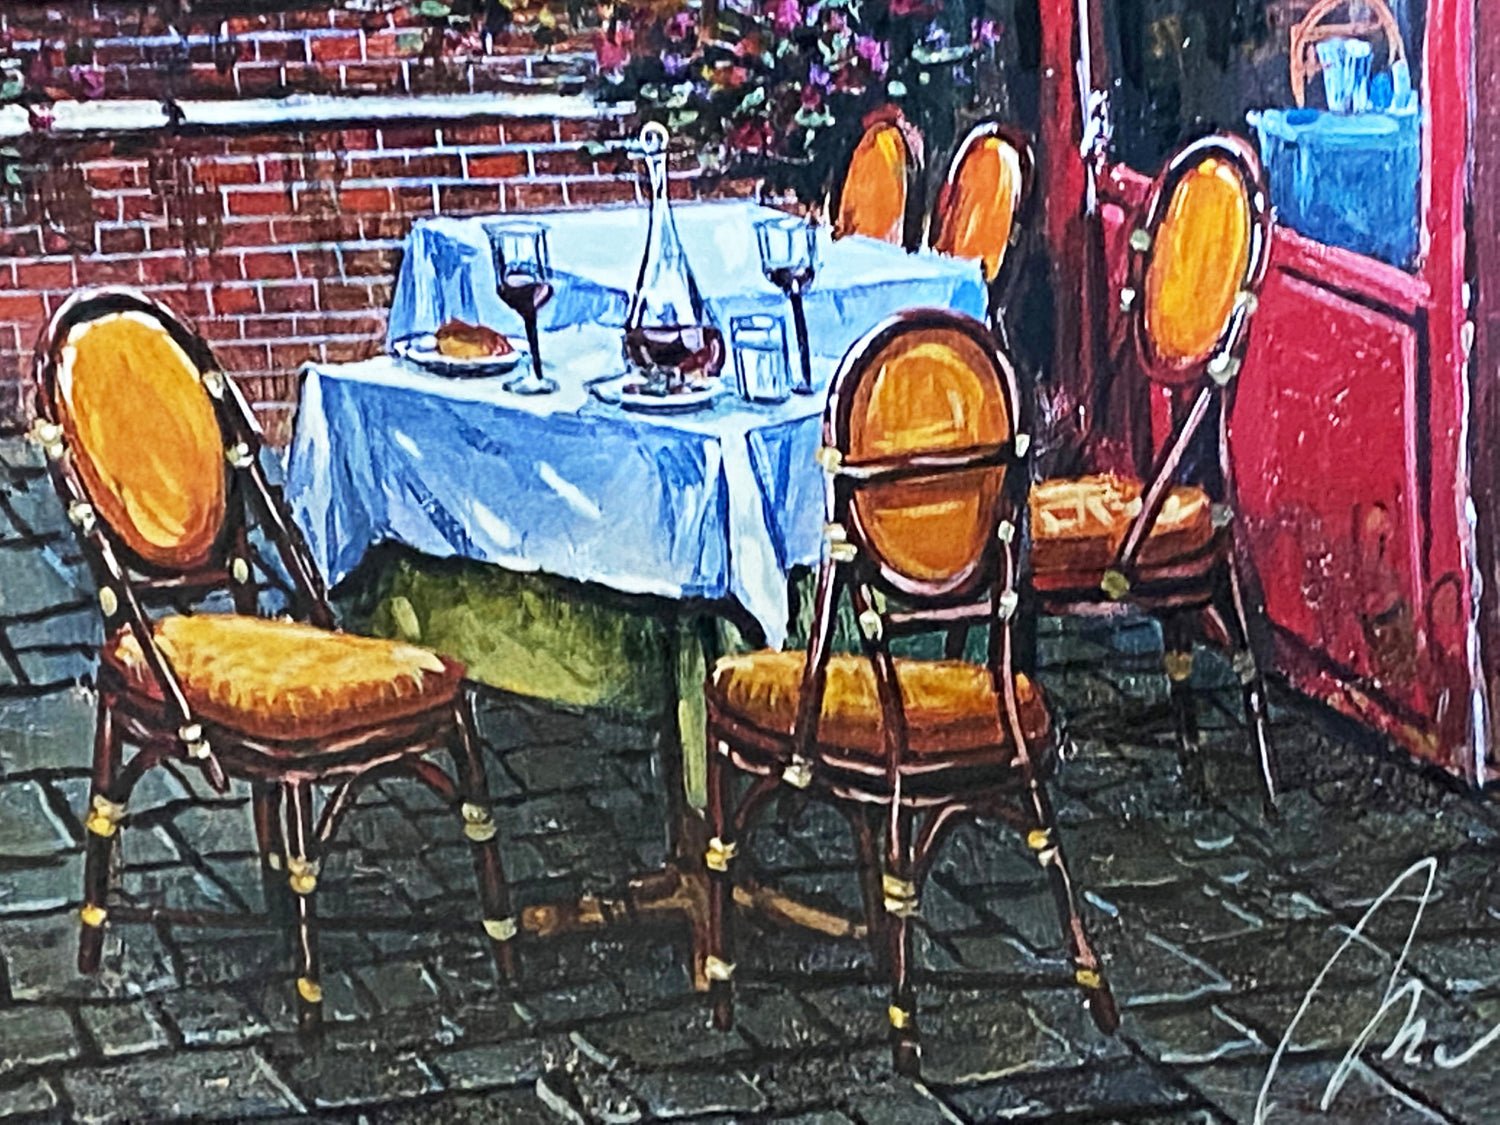 Outdoor Cafe - Limited Edition Lithograph on Paper by Anatoly Metlan